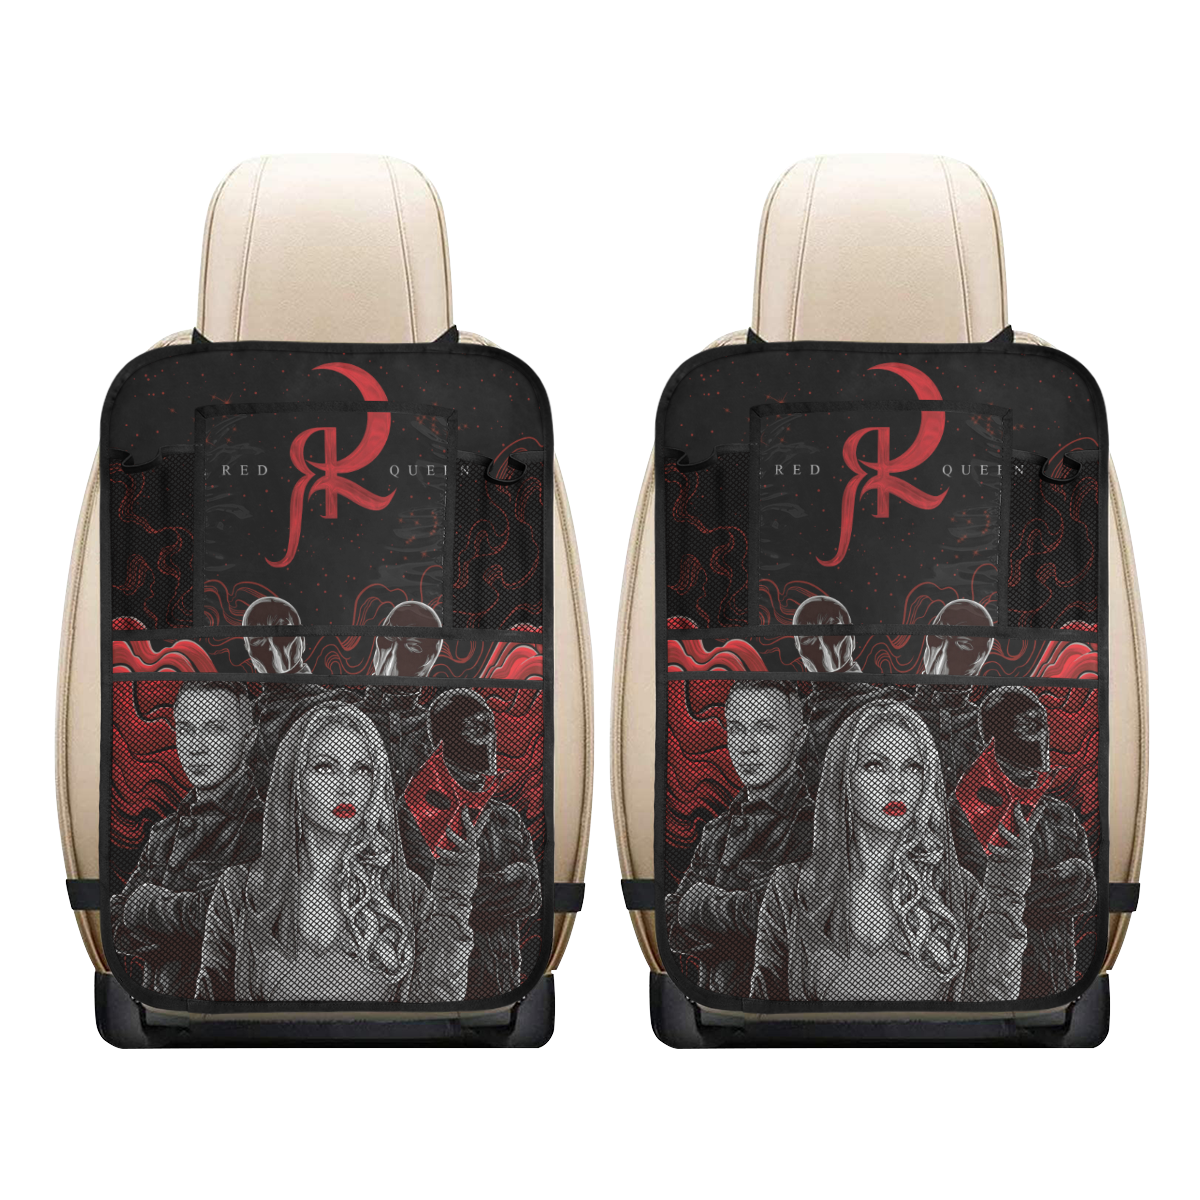 RED QUEEN BAND Car Seat Back Organizer (2-Pack)